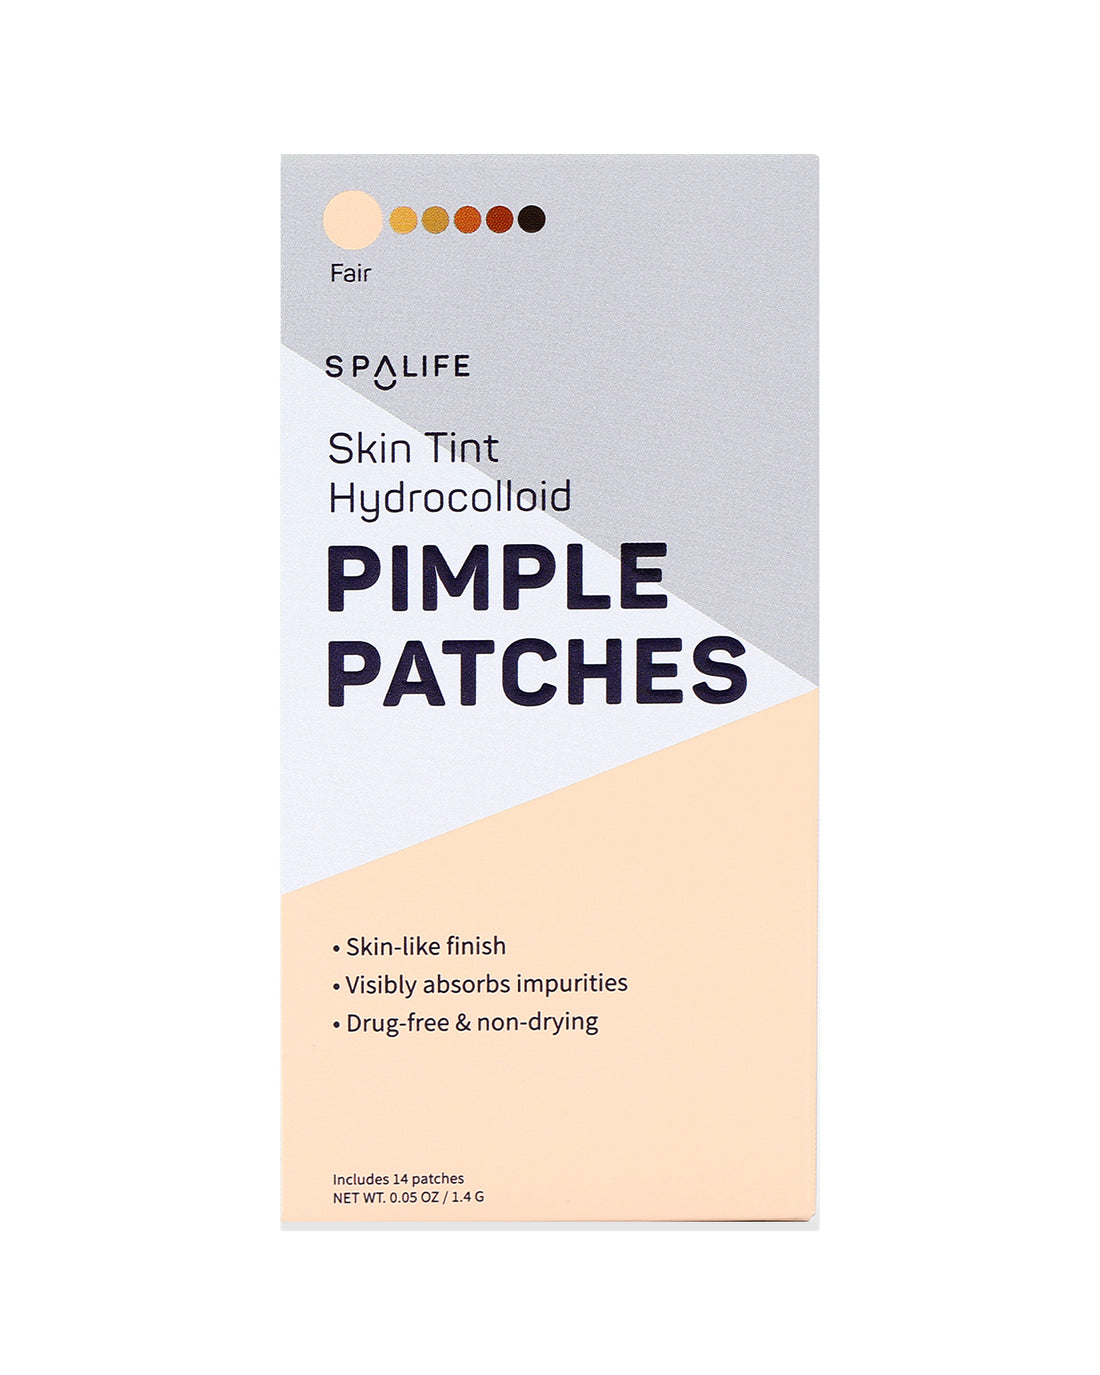 Skin_tint_pimple_patches_packe-938